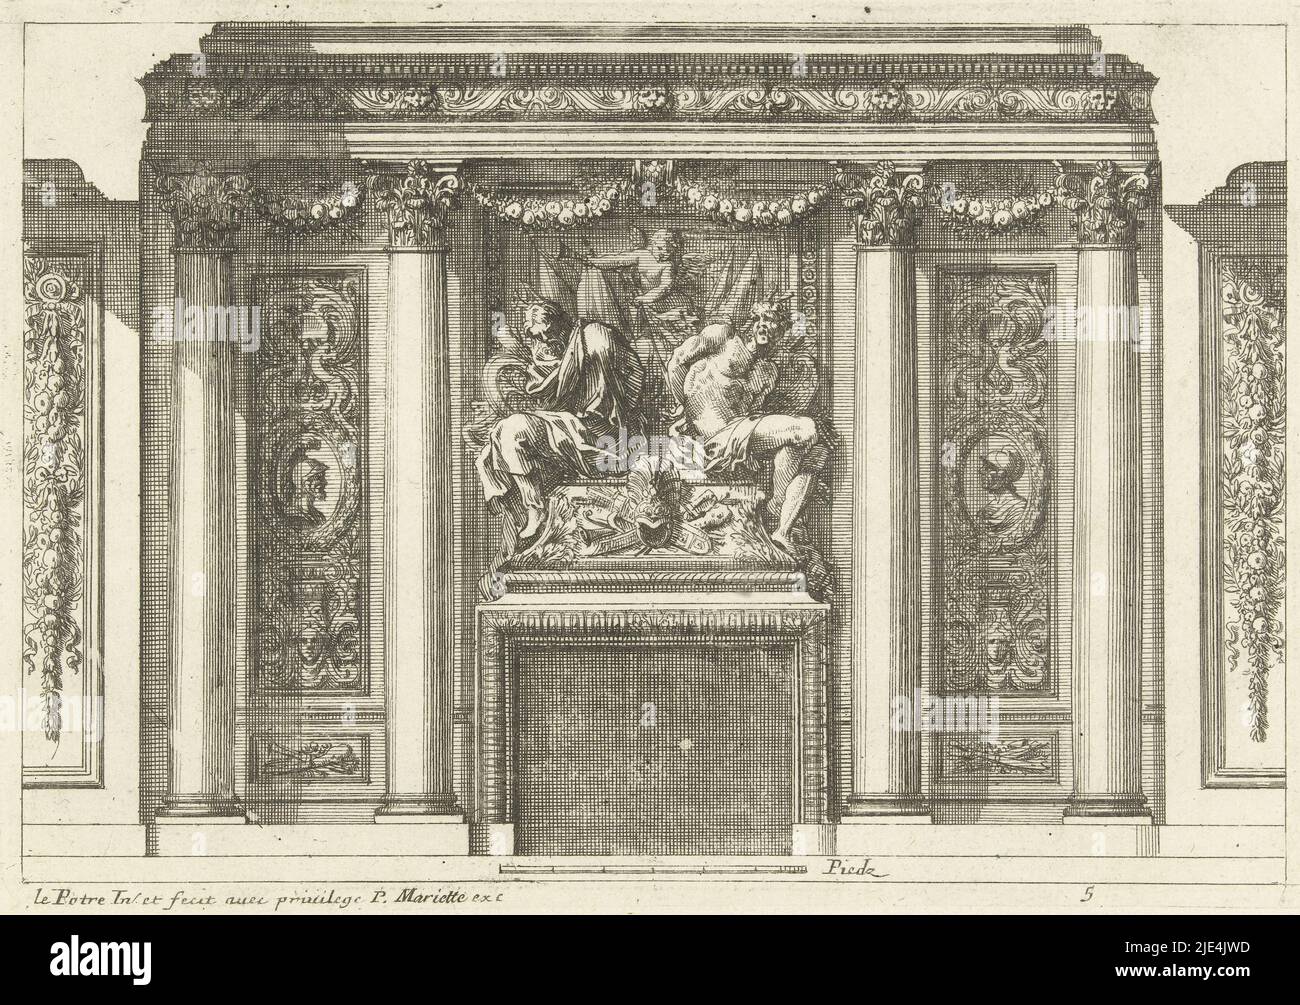 Fireplace with two chained prisoners, Jean Lepautre, 1658 - 1670, Cross-section of a room with a fireplace showing two chained prisoners in front of an armorial trophy.  To the left and right two Corinthian columns. From second edition., print maker: Jean Lepautre, (mentioned on object), Jean Lepautre, (mentioned on object), publisher: Pierre Mariette (II), (mentioned on object), print maker: France, (possibly), France, (possibly), publisher: Paris, 1658 - 1670, paper, etching, h 148 mm × w 217 mm Stock Photo